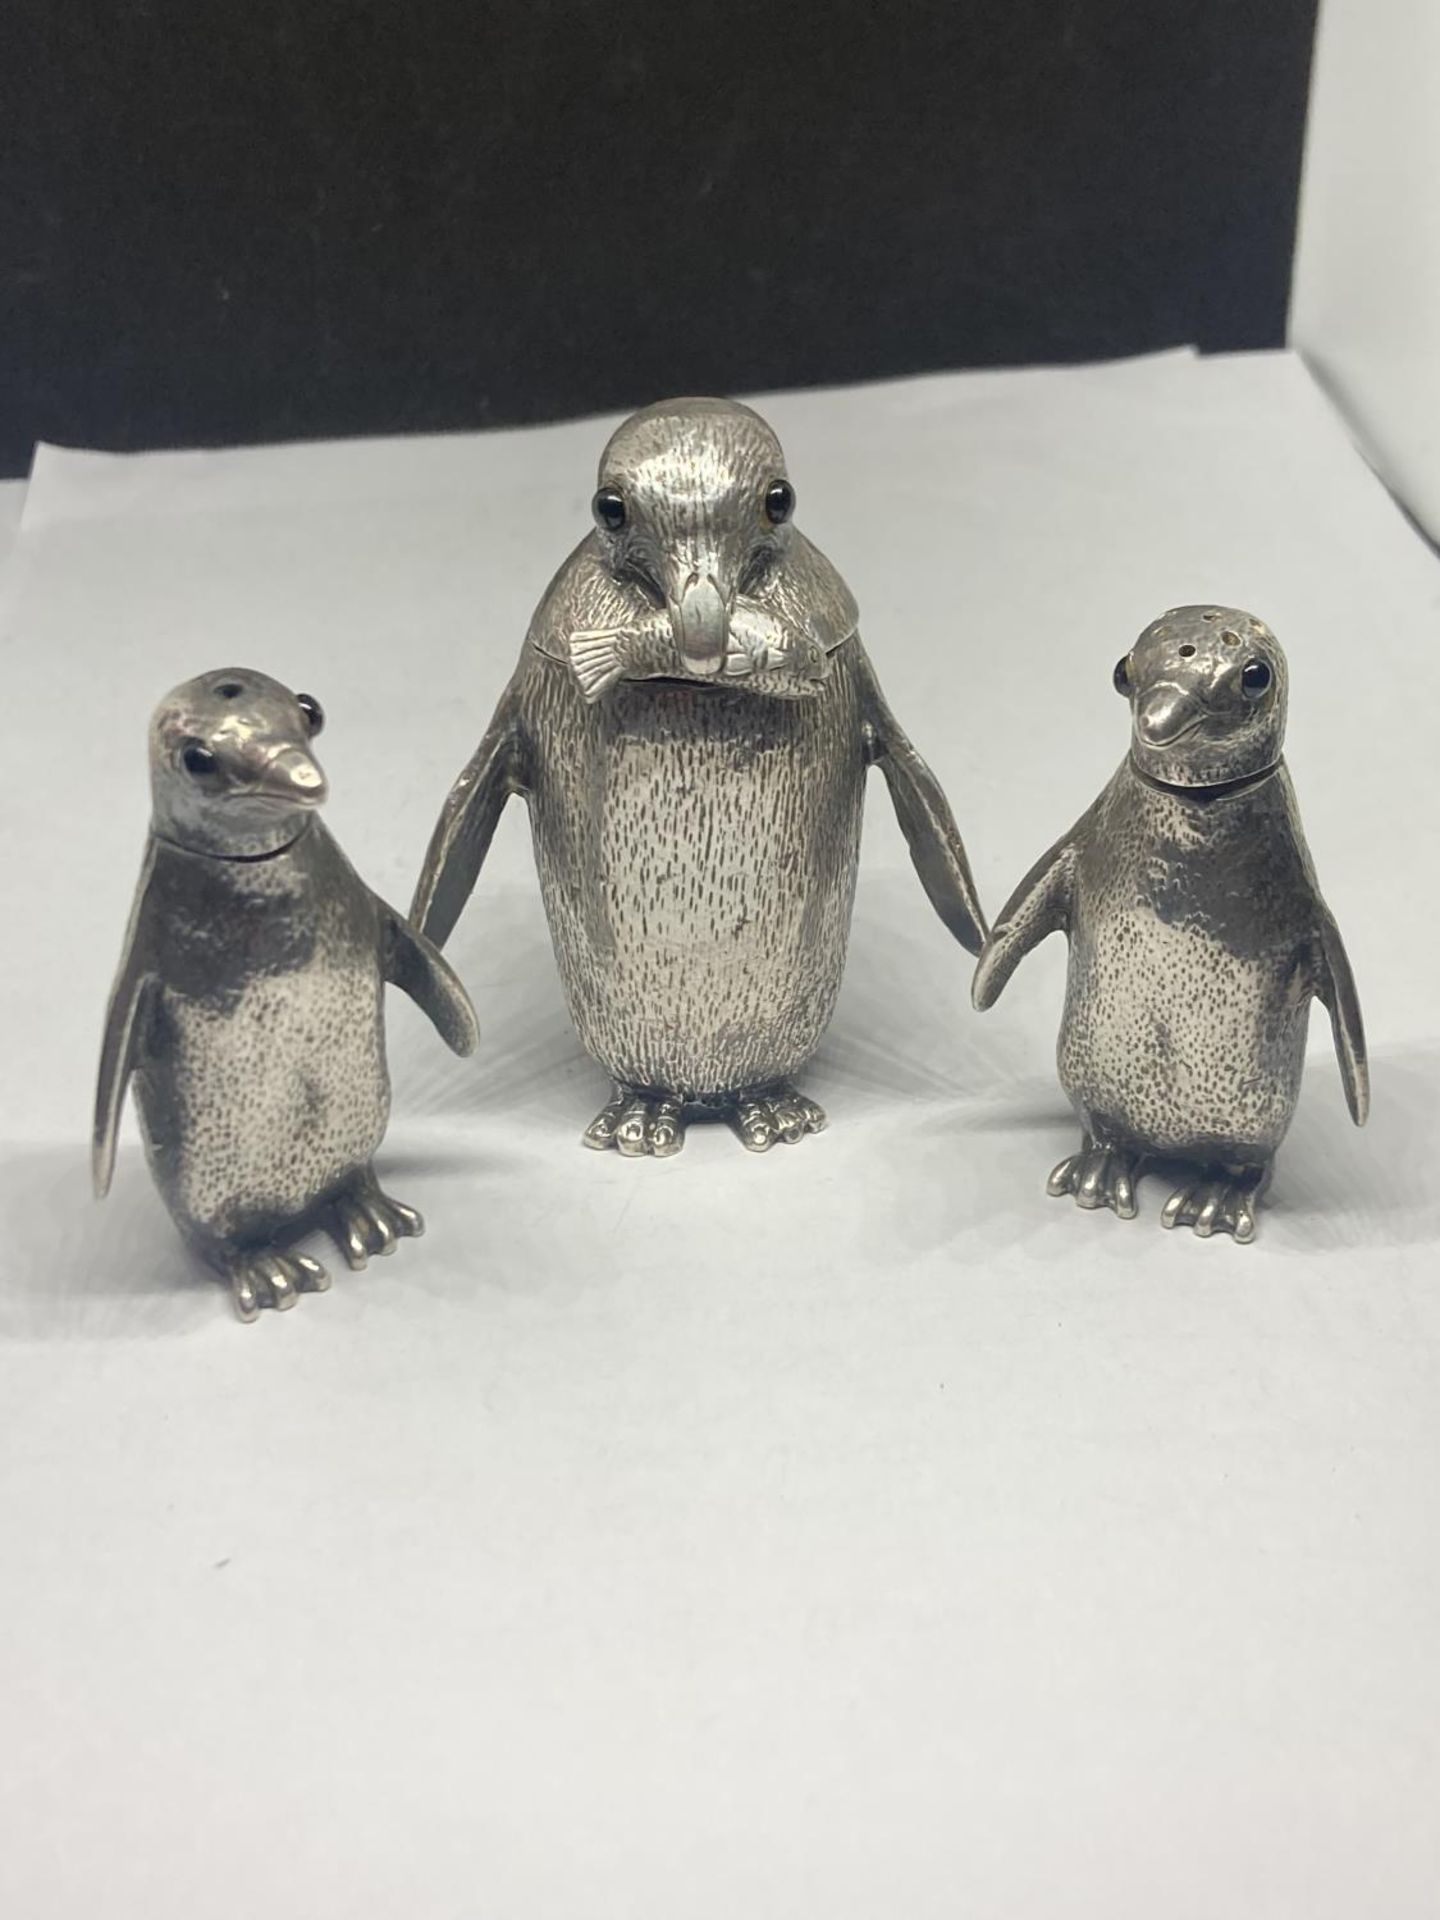 A HALLMARKED LONDON SILVER CRUET SET IN THE FORM OF THREE PENGUINS GROSS WEIGHT 279.3 GRAMS